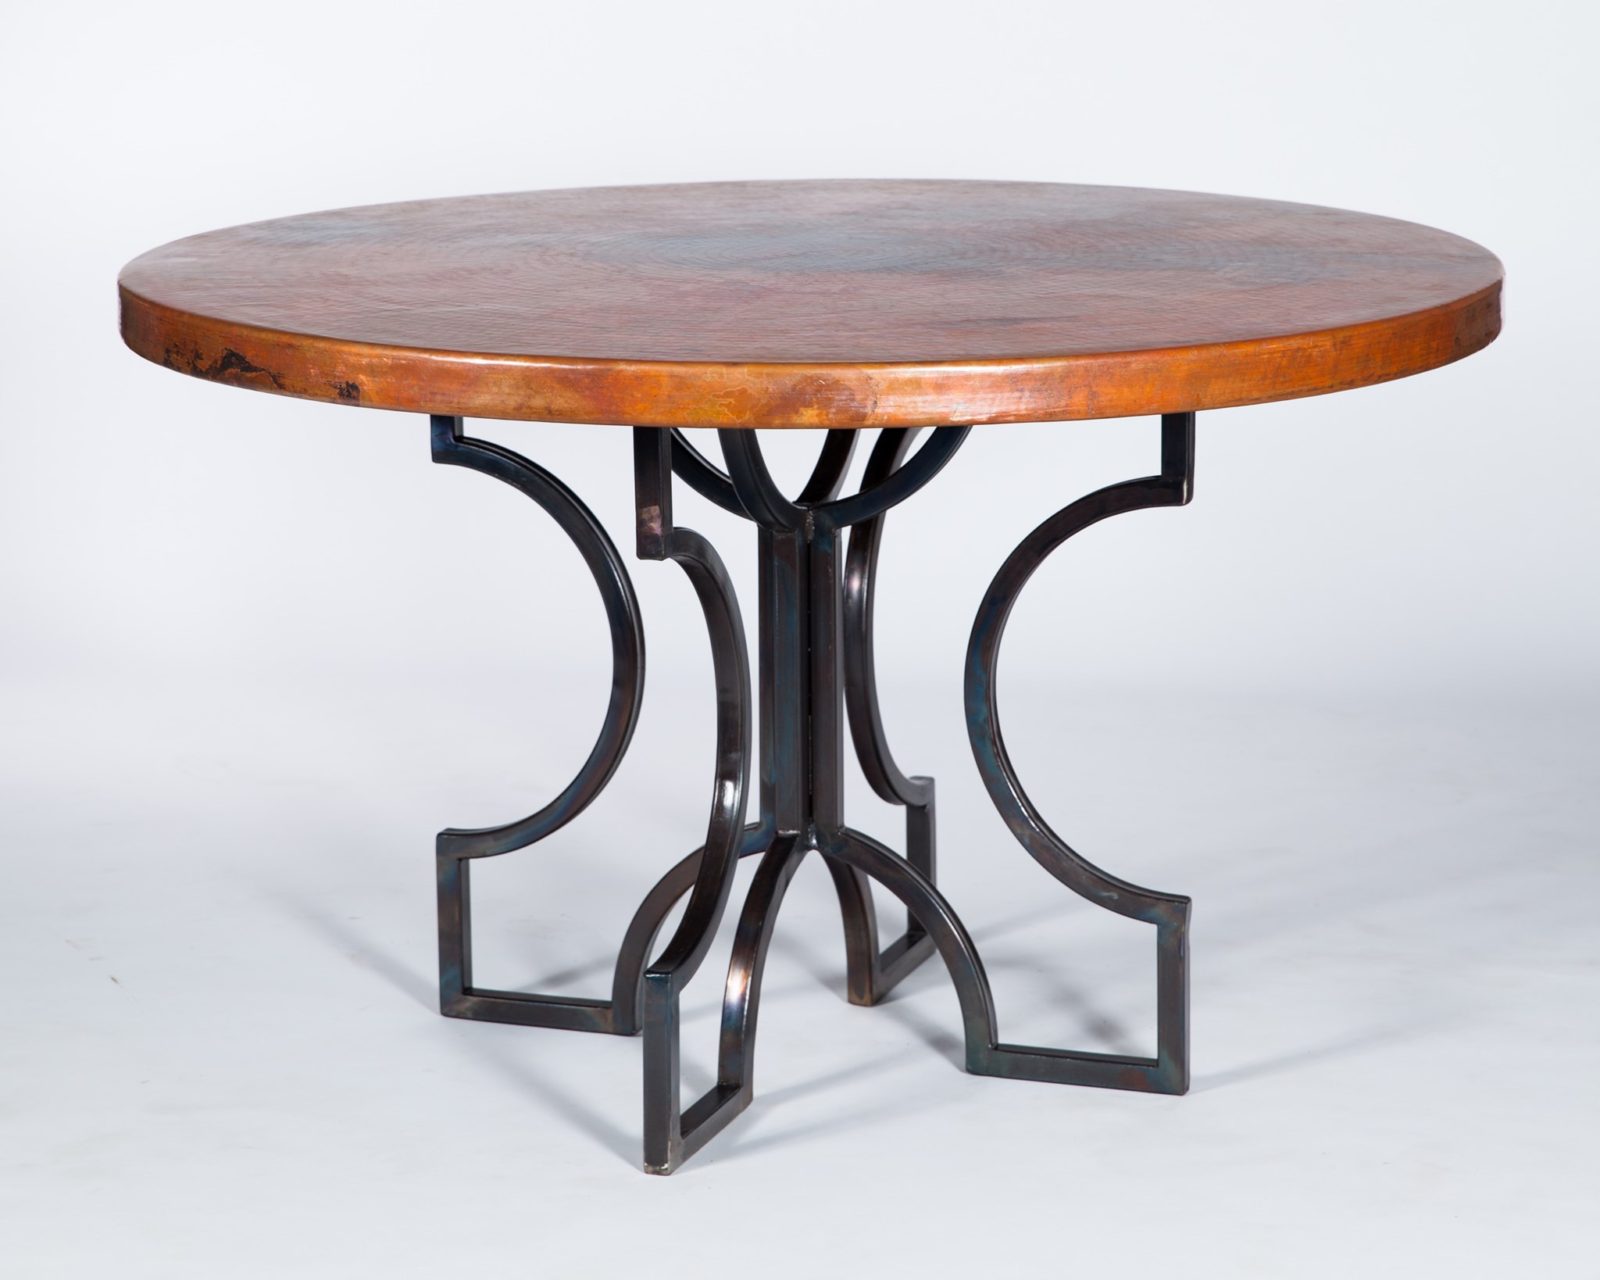 Dining Room Table With Copper Top